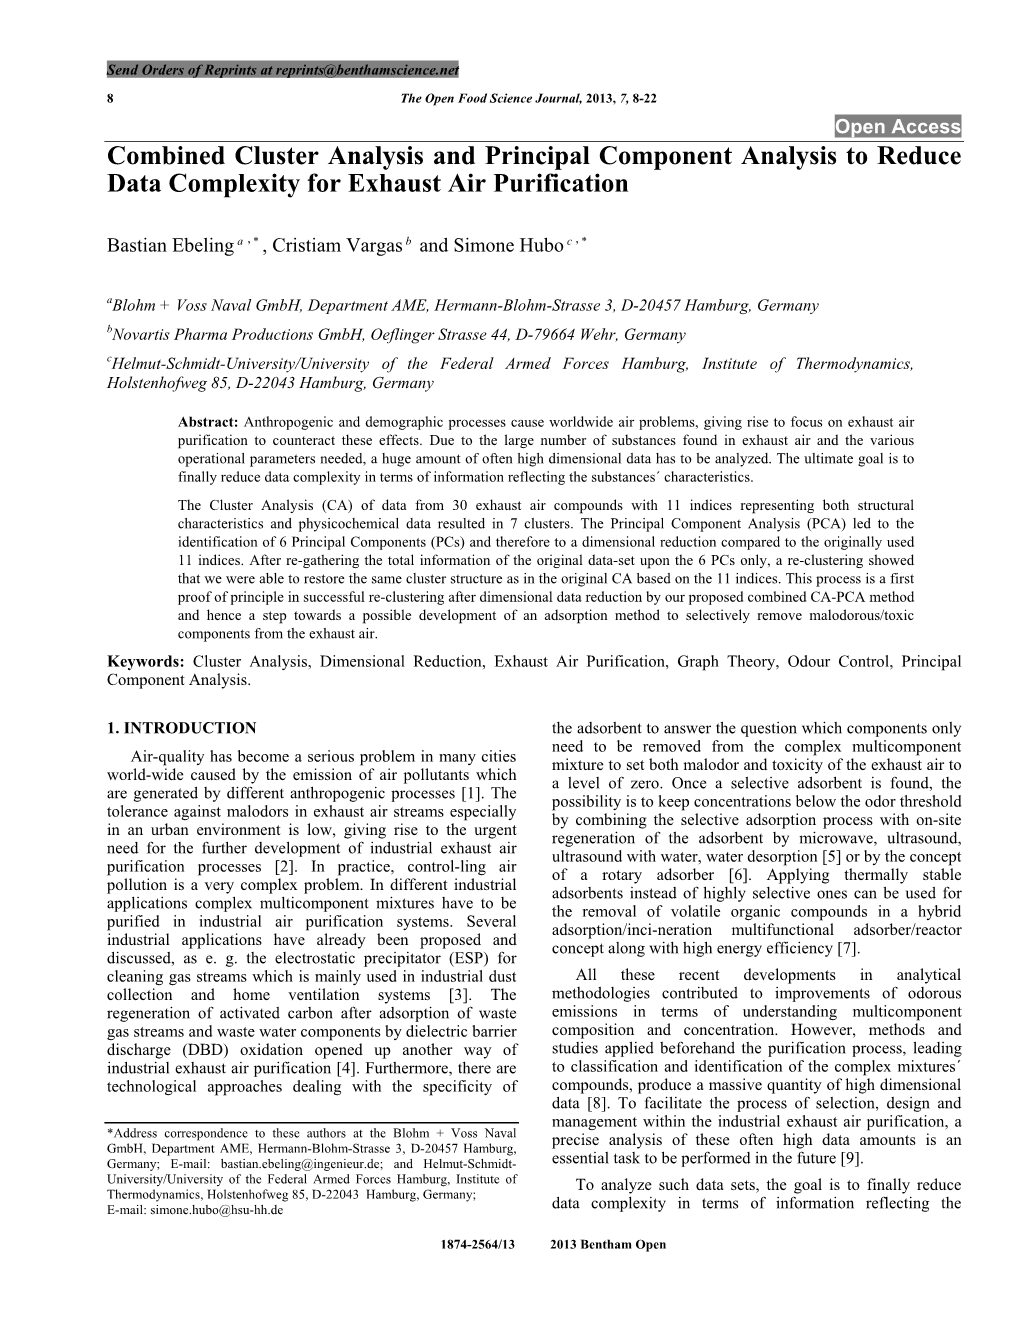 Combined Cluster Analysis and Principal Component Analysis to Reduce Data Complexity for Exhaust Air Purification